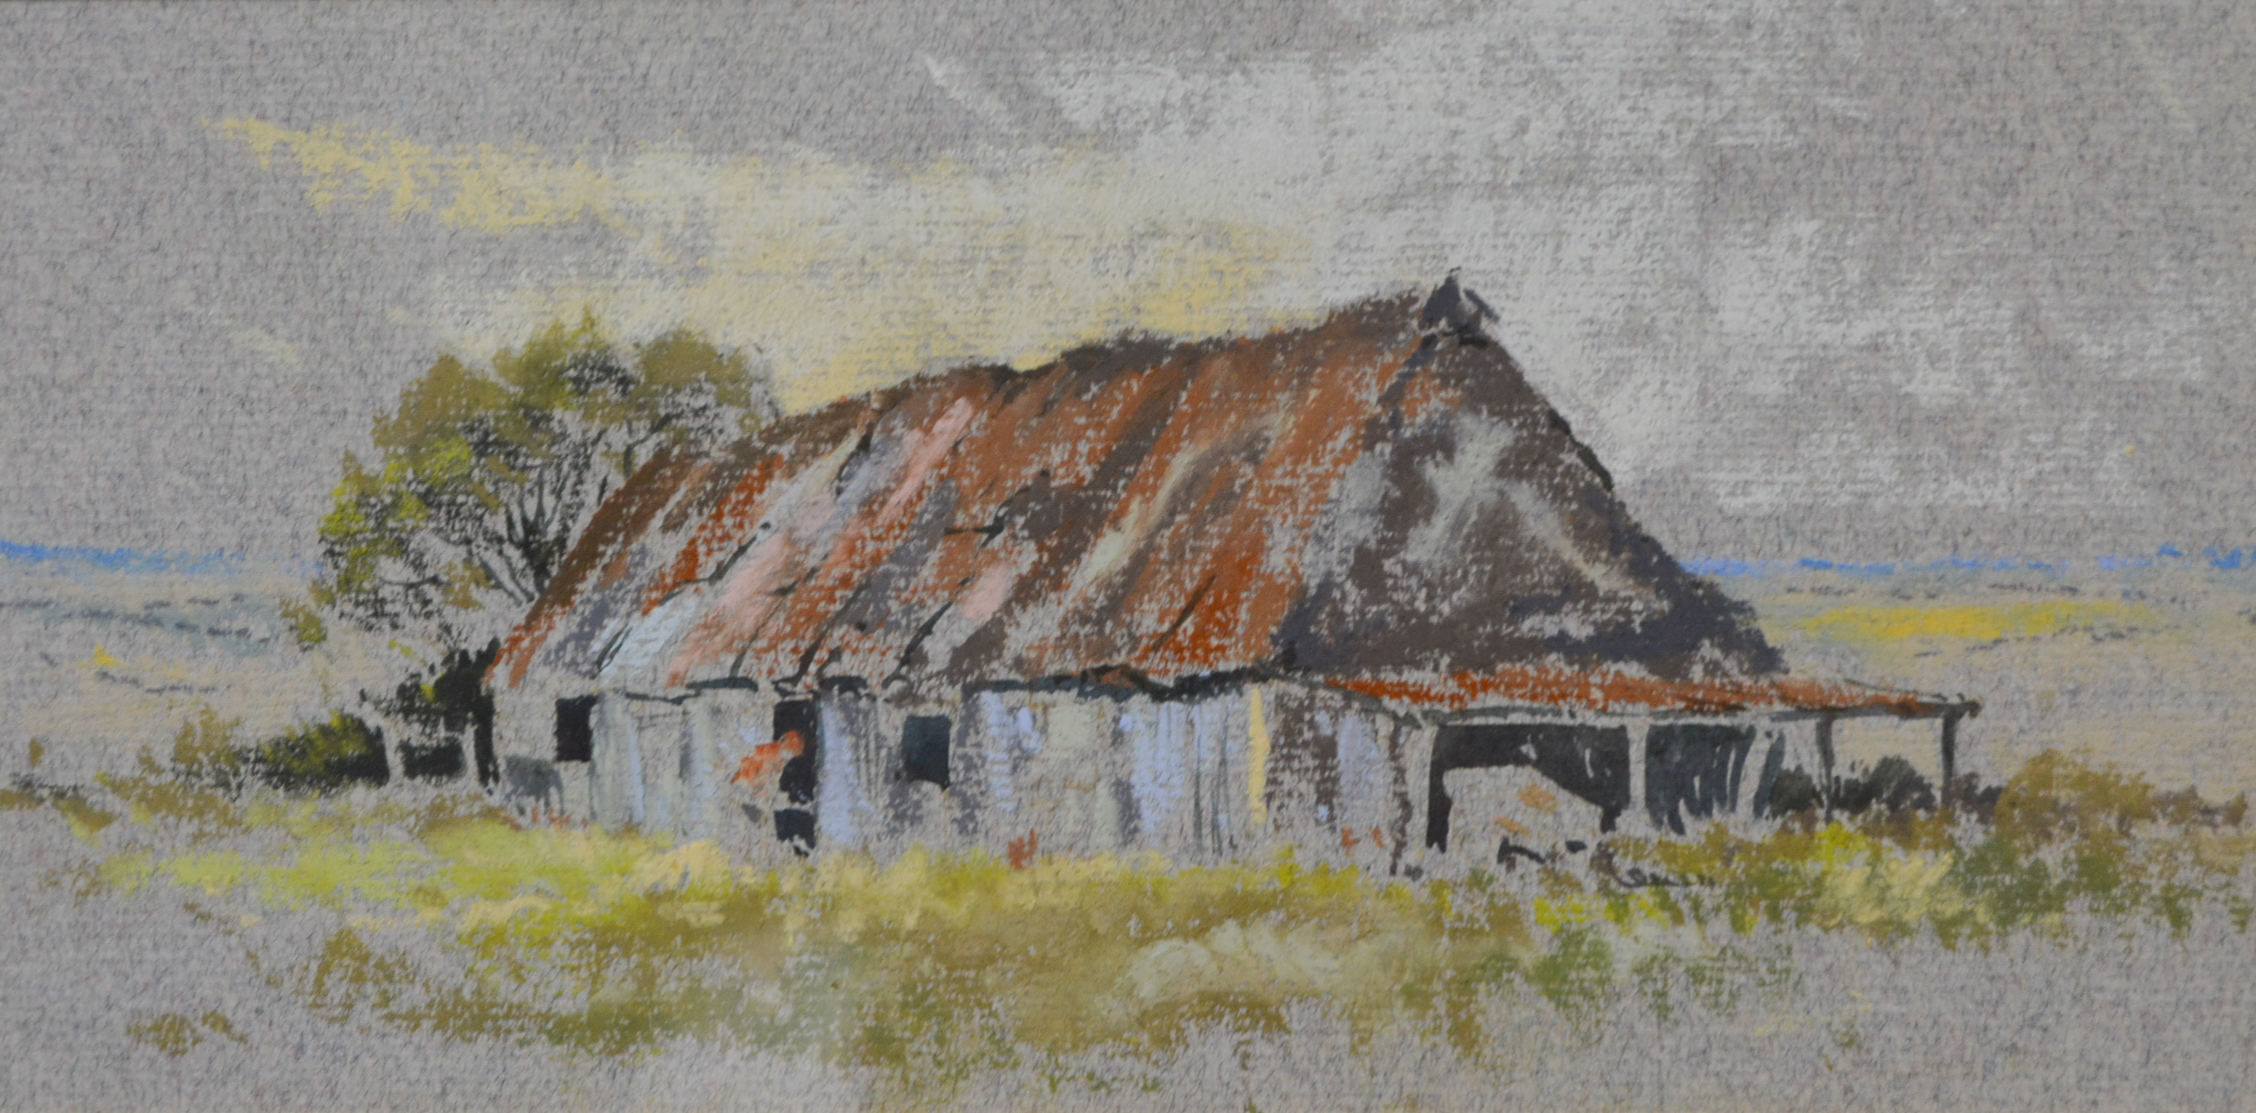 Alan Oliver, 'An old barn', pastel drawing, 11cm x 23cm.